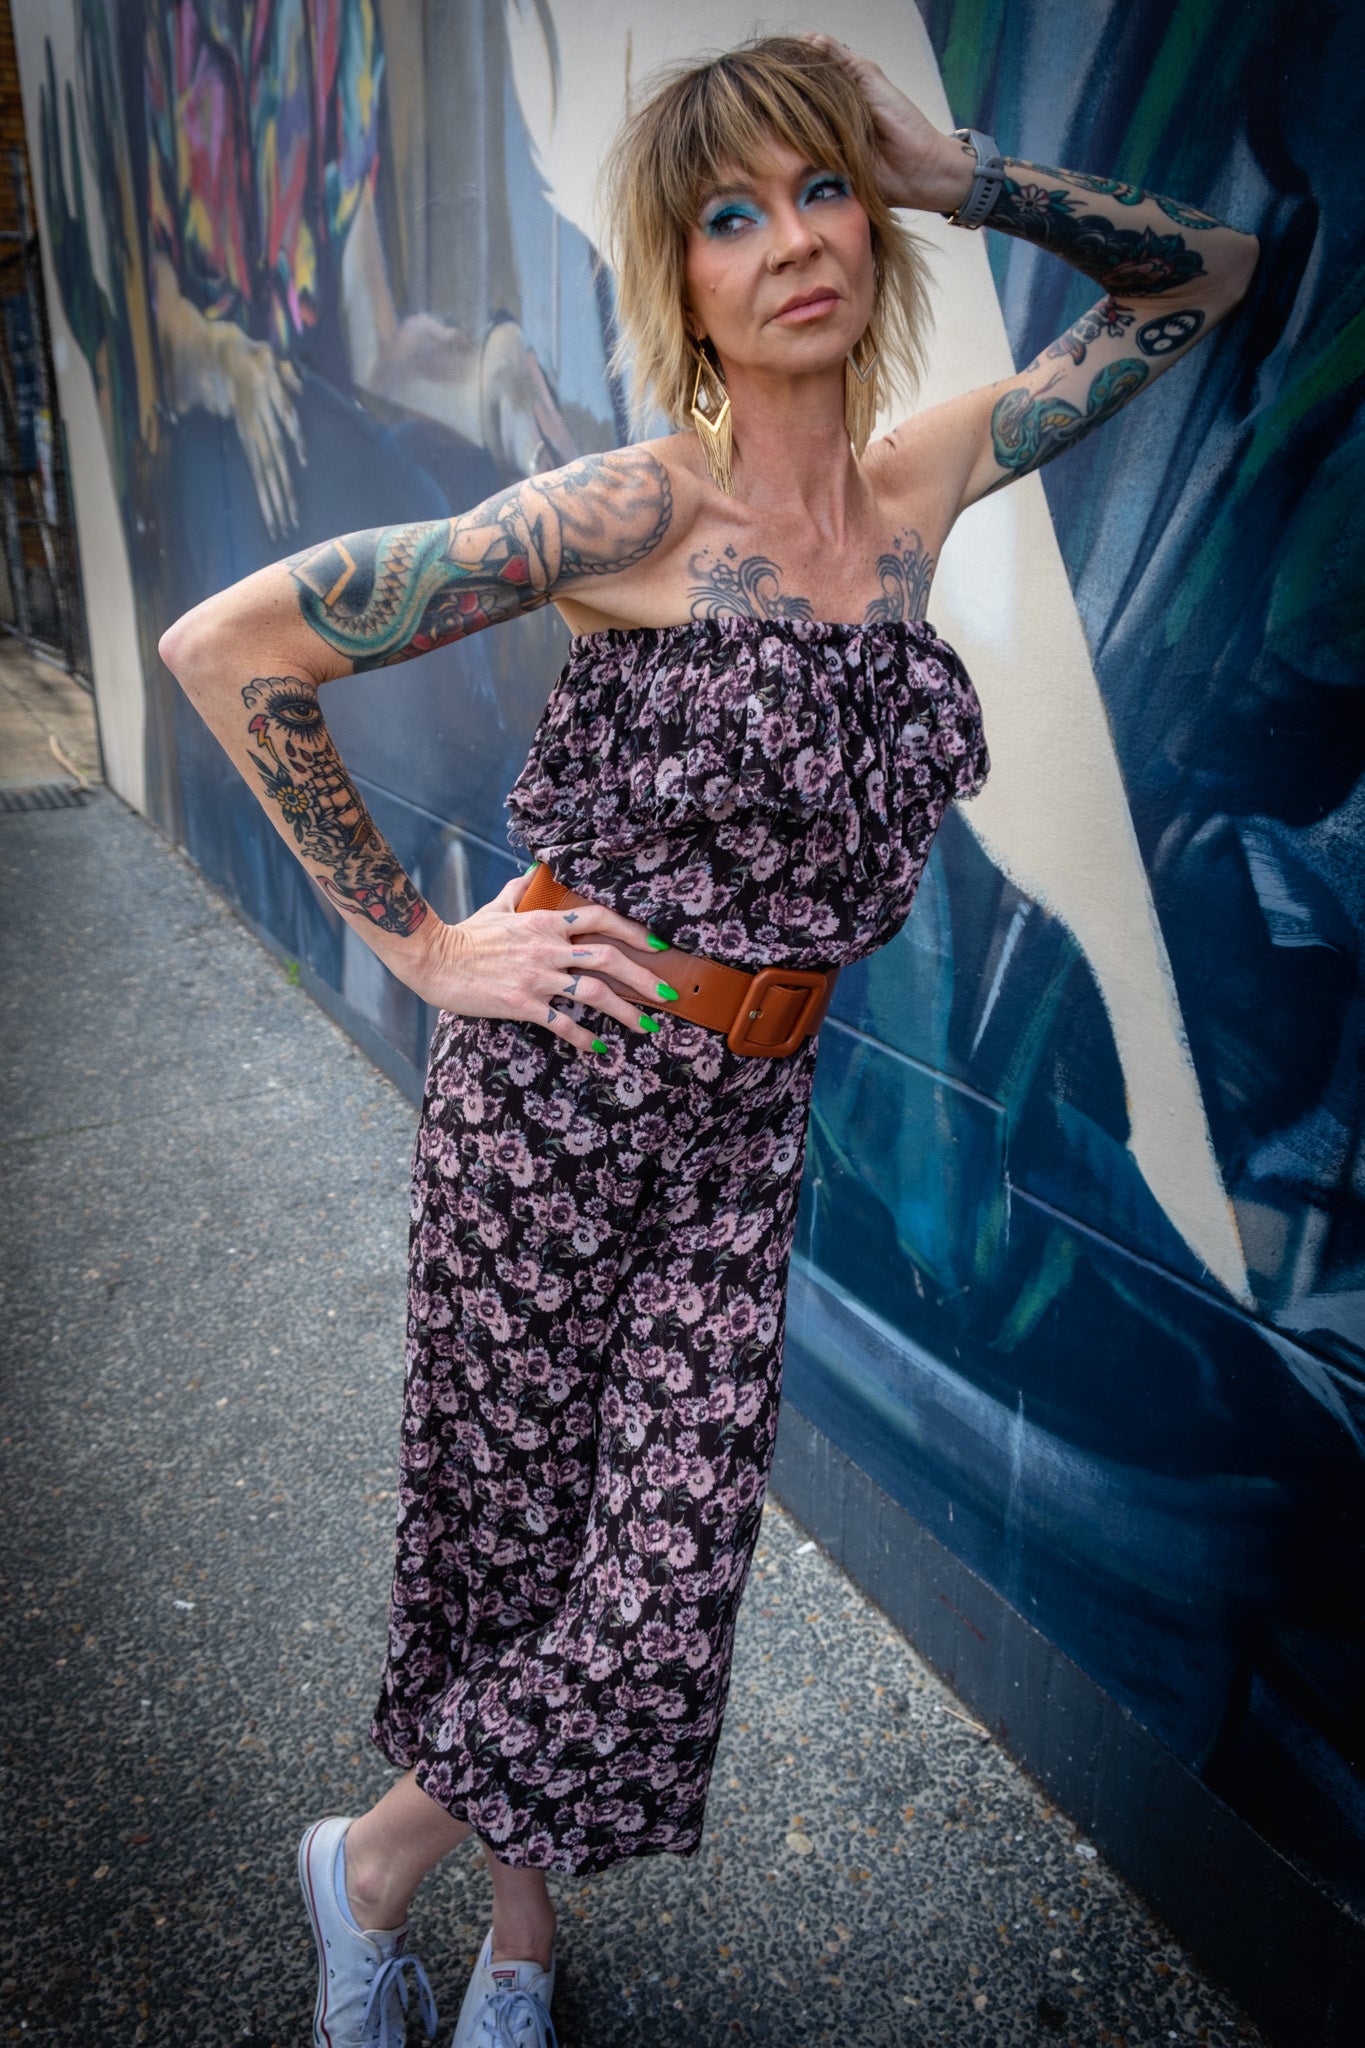 Punk style model wearing a black and purple jumpsuit with a brown belt while leaning on the wall.